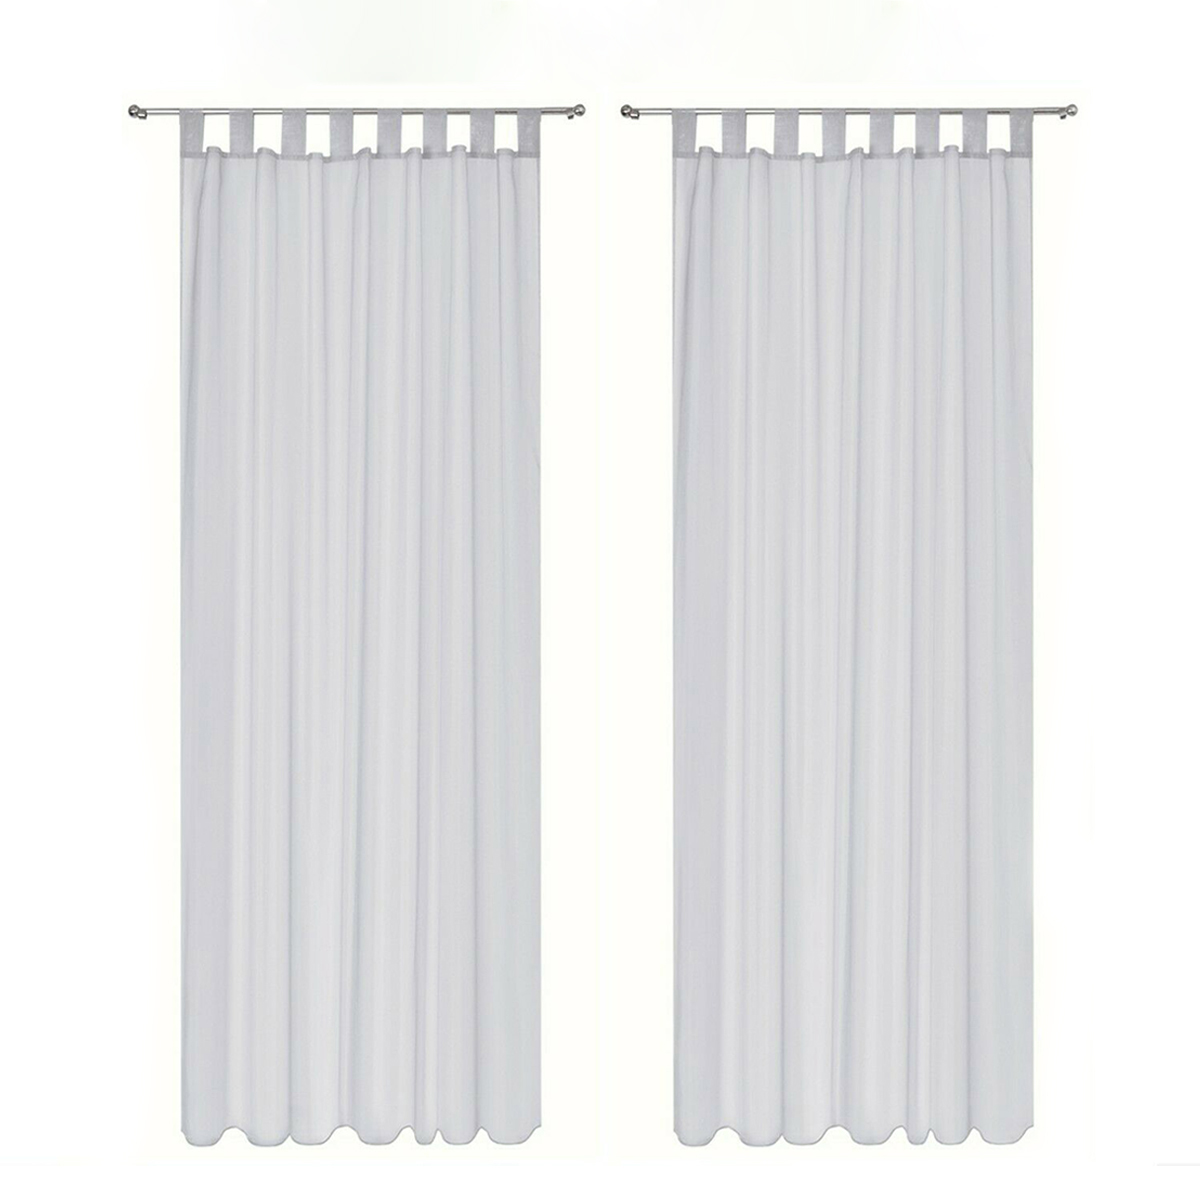 12PCS-White-Voile-Curtain-Polyester-Breathable-Tulle-Sheer-Curtains-for-Kitchen-Living-Room-Bedroom-1922438-4